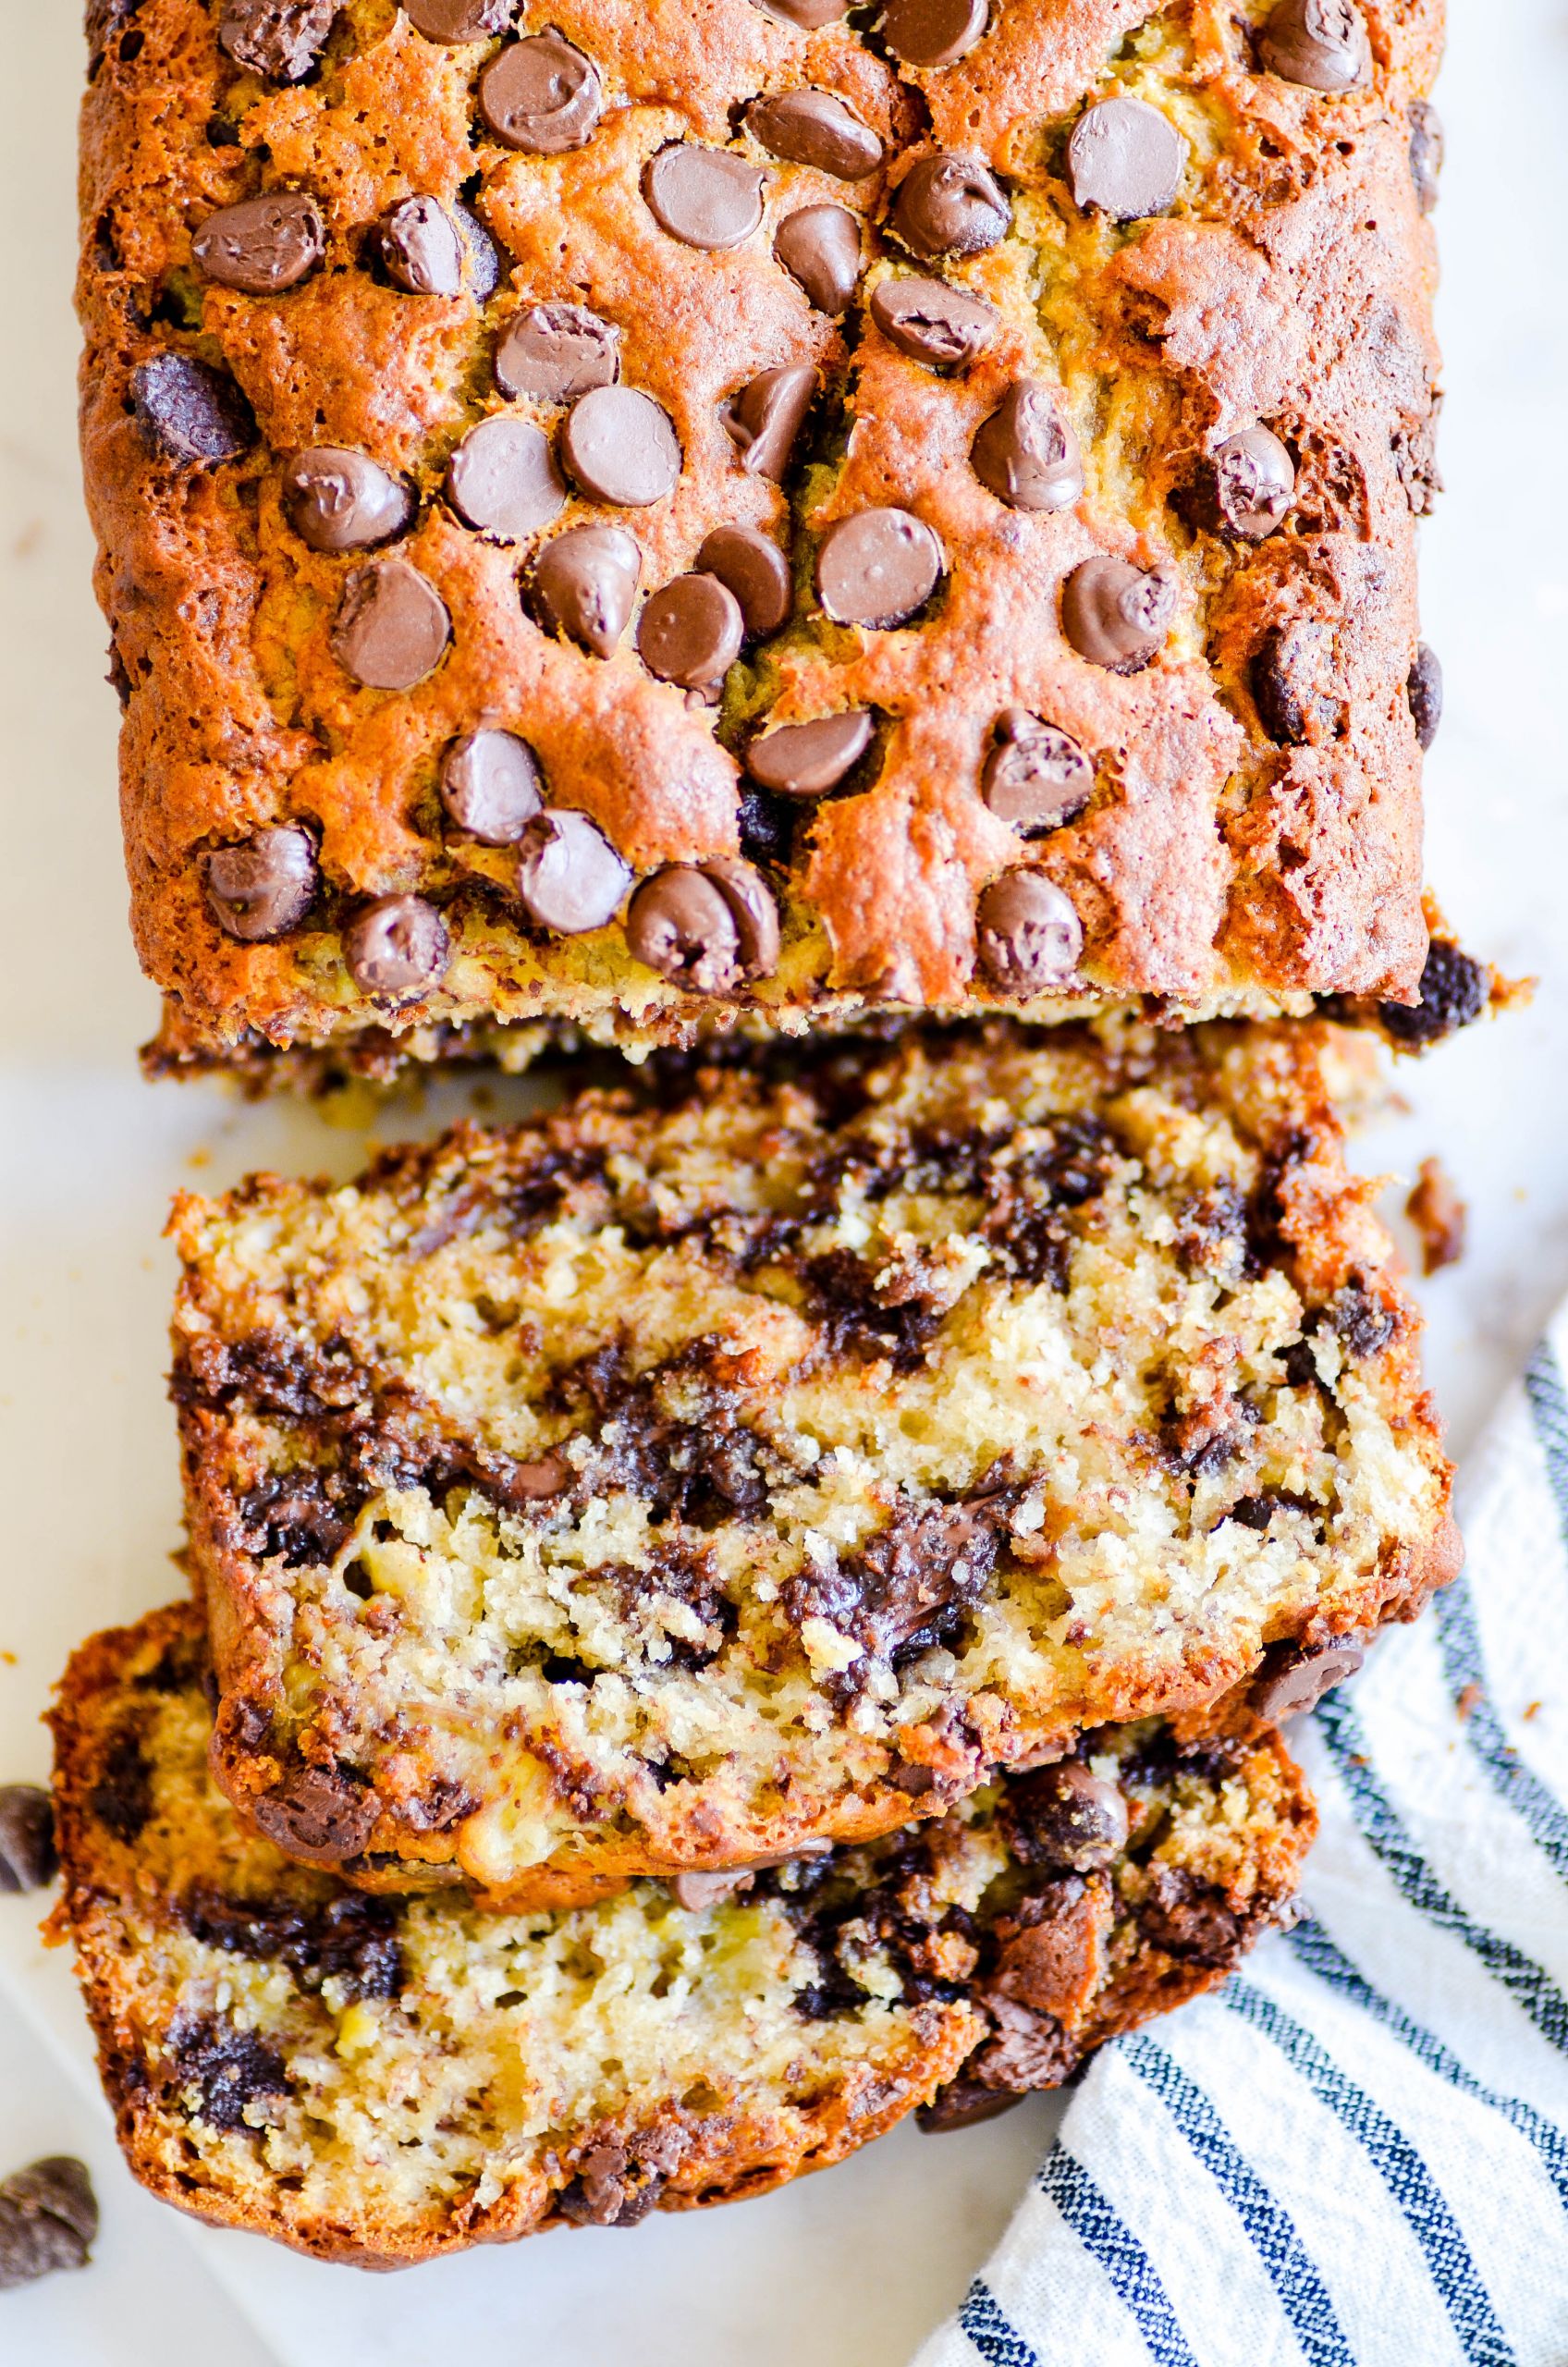 Best Chocolate Chip Banana Bread
 Mom s Famous Chocolate Chip Banana Bread Recipe